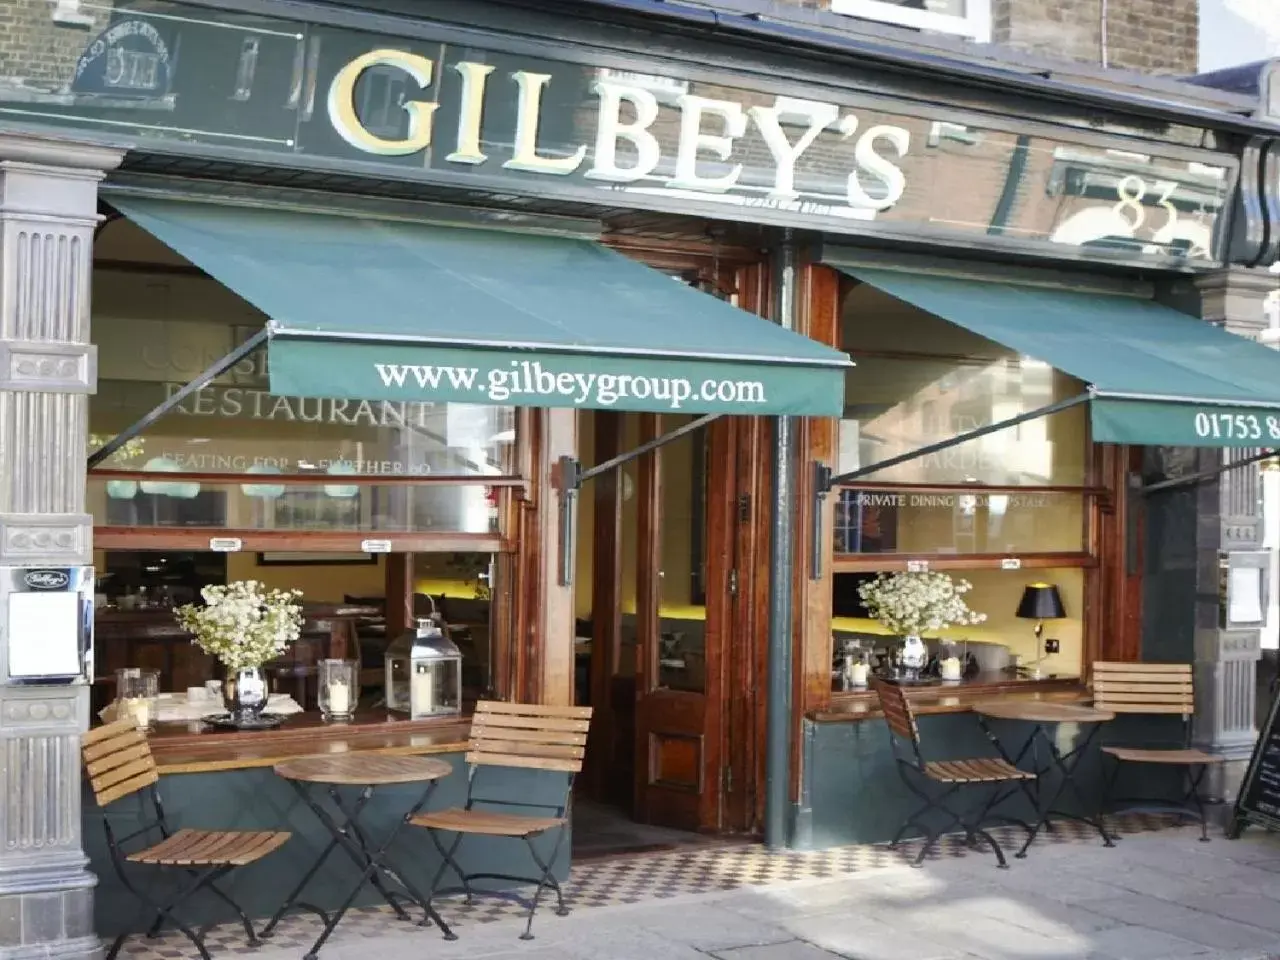 Property building in Gilbey's Bar, Restaurant & Townhouse